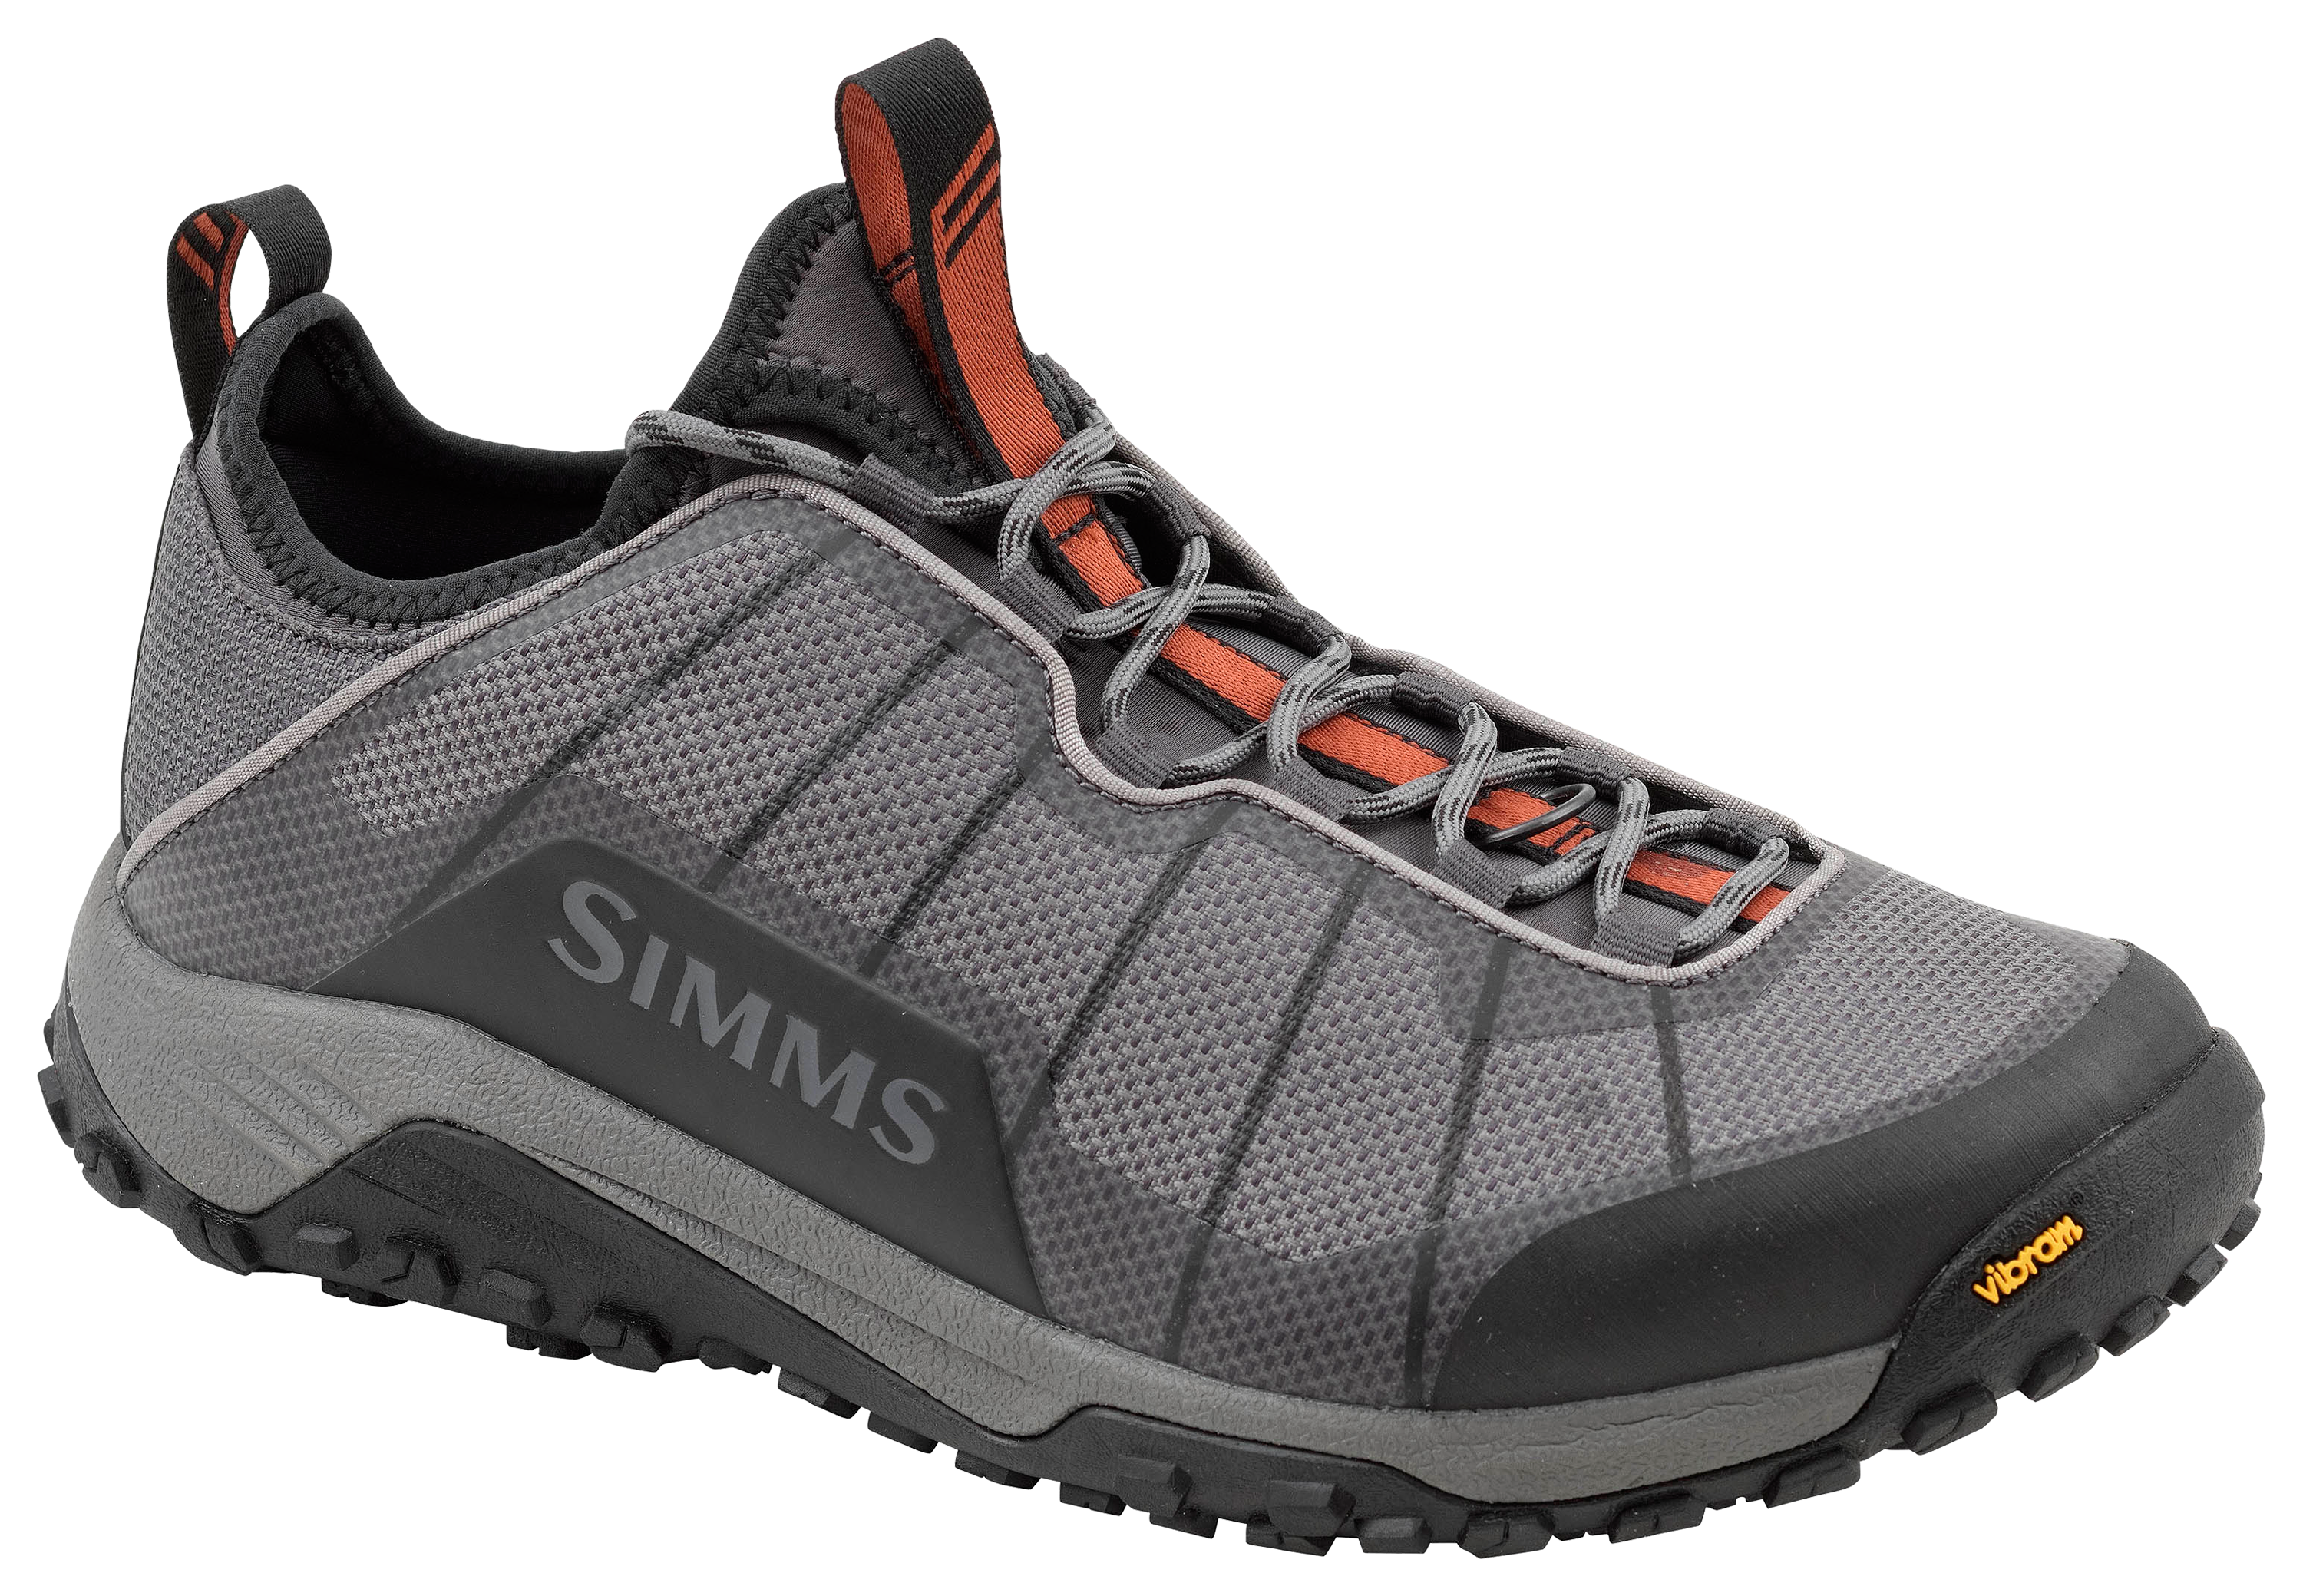 Simms Flyweight Wet Wading Shoes for Men